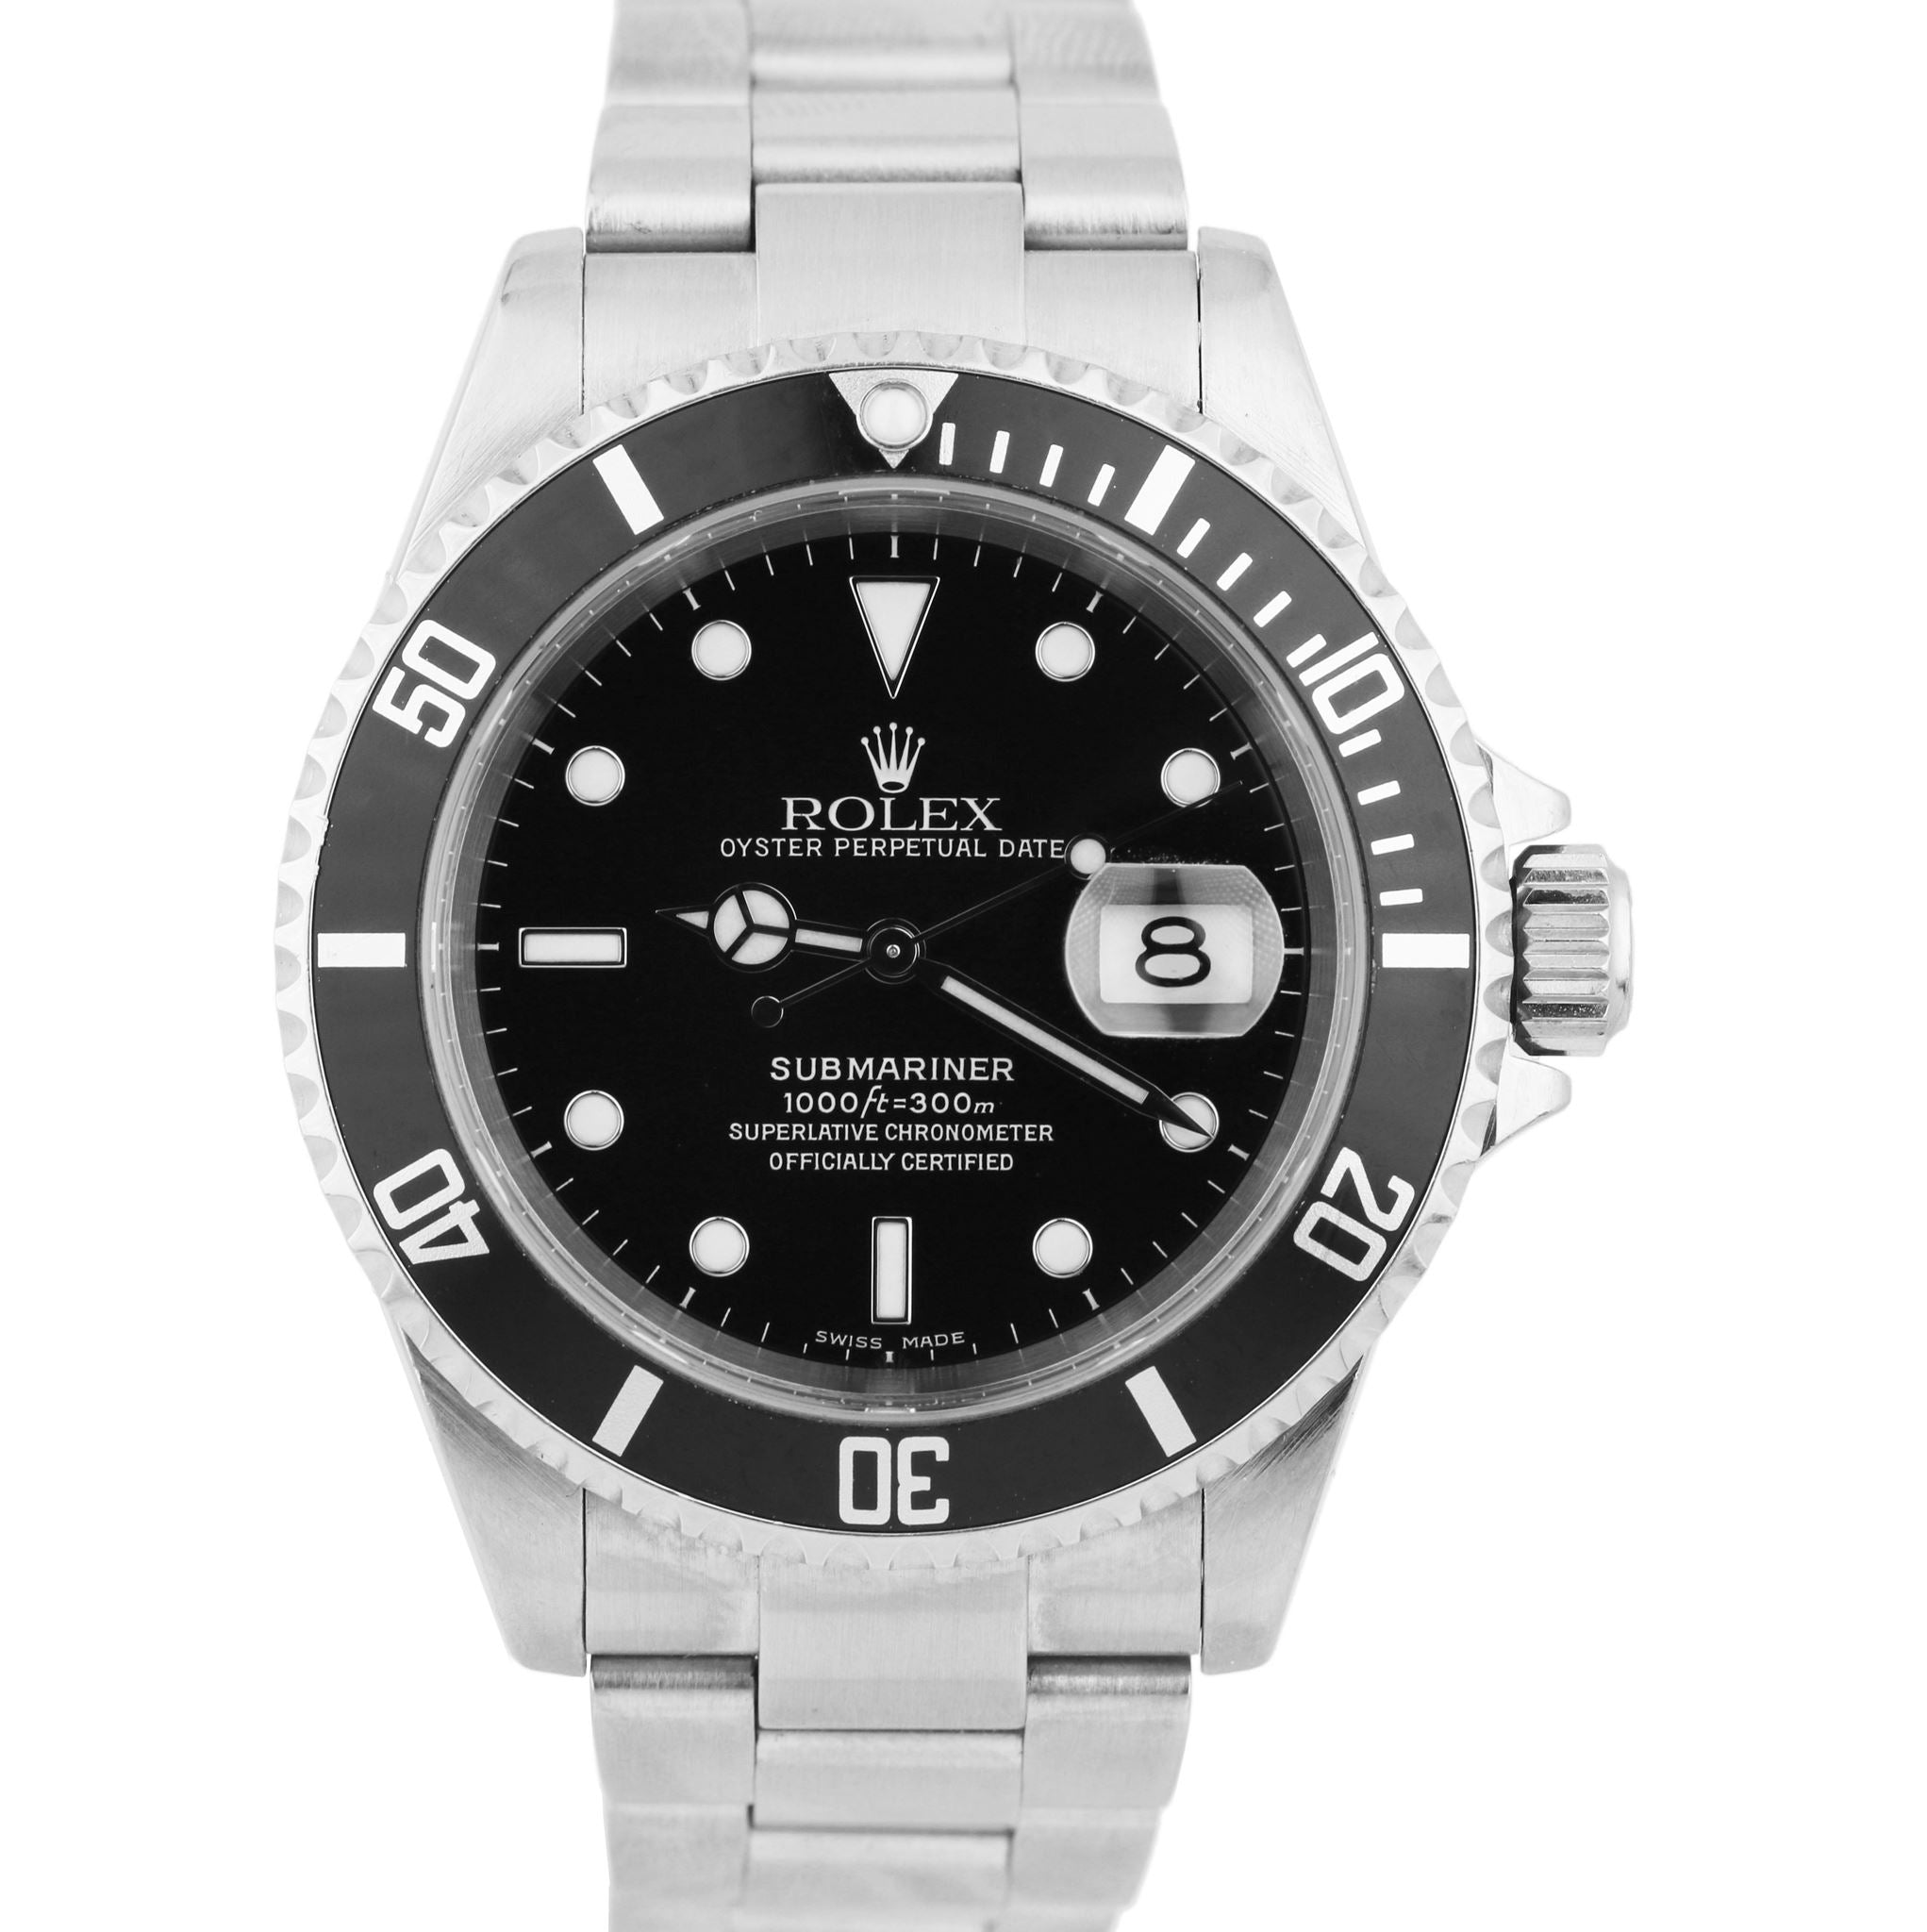 Rolex Submariner Date 16610 NO HOLES 40mm Black Stainless Z SERIAL Dive Watch